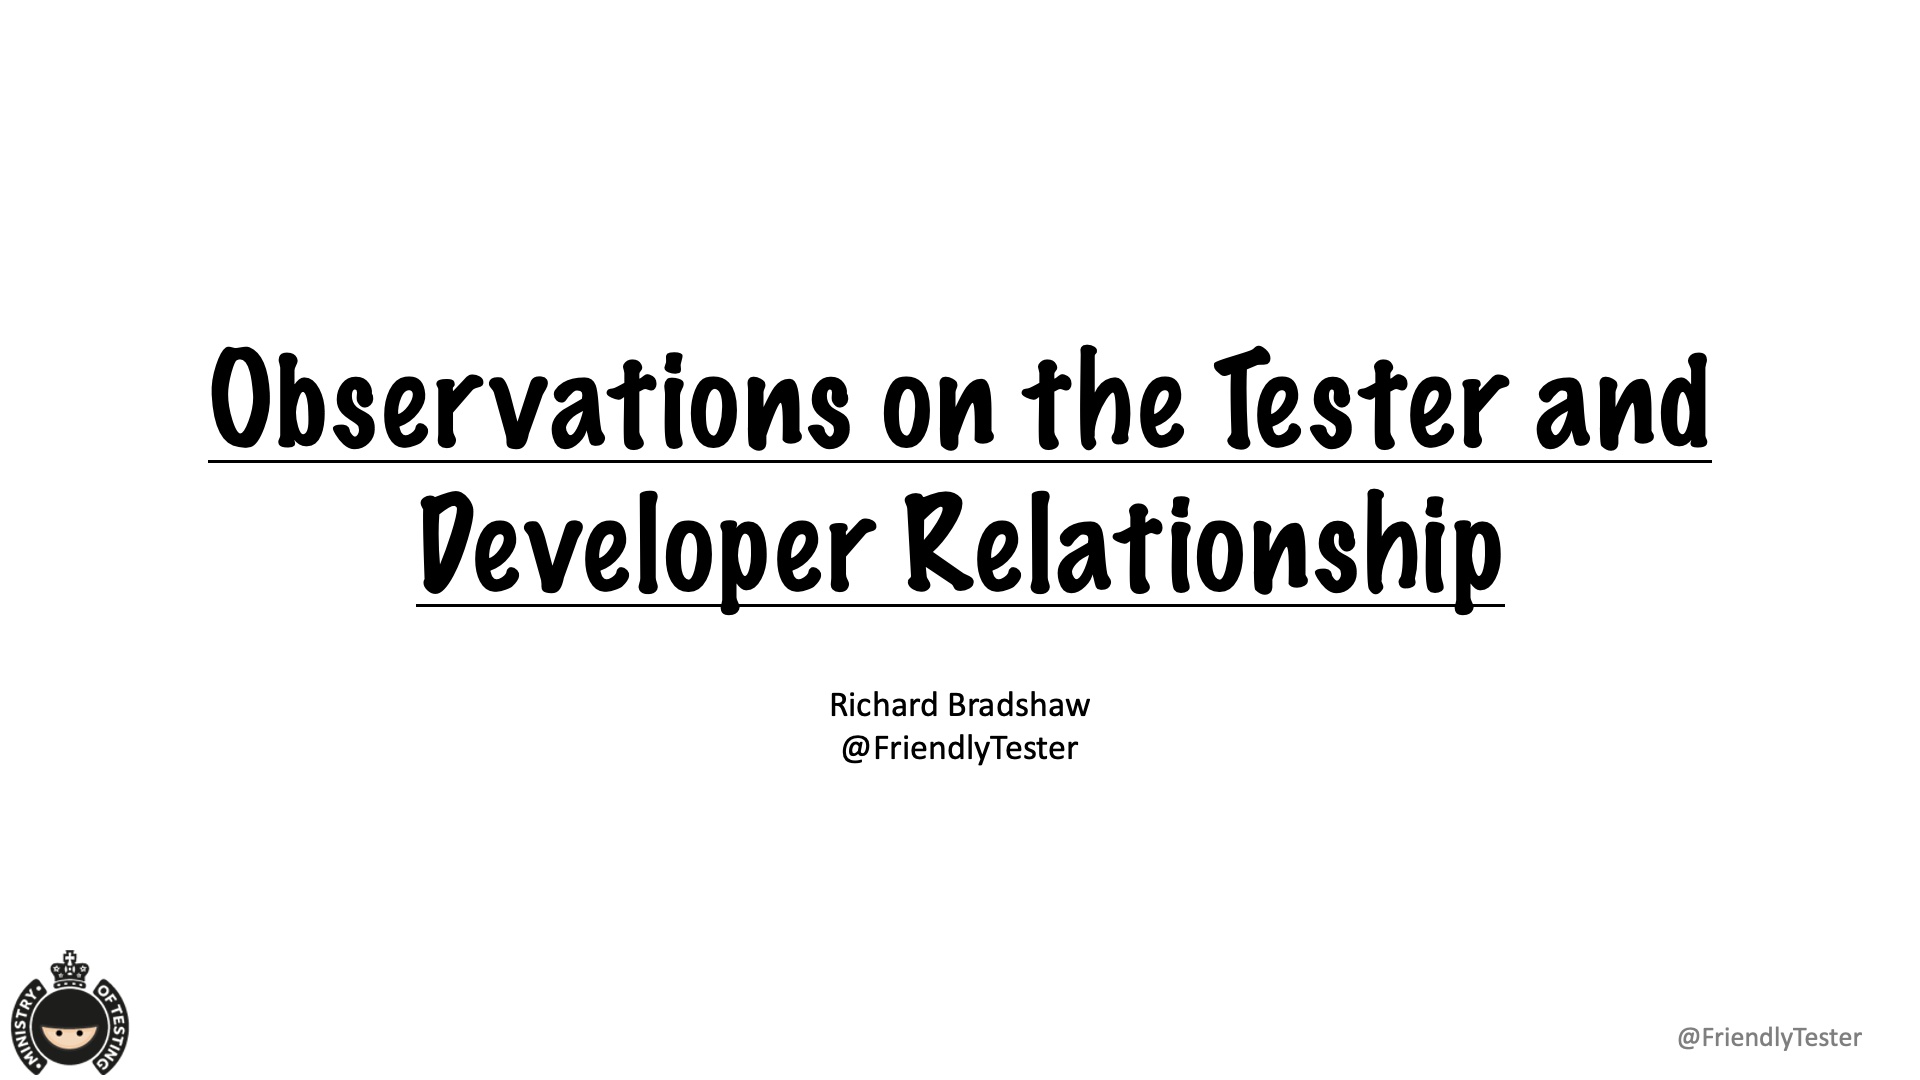 Observations on the Tester and Developer Relationship with Richard Bradshaw